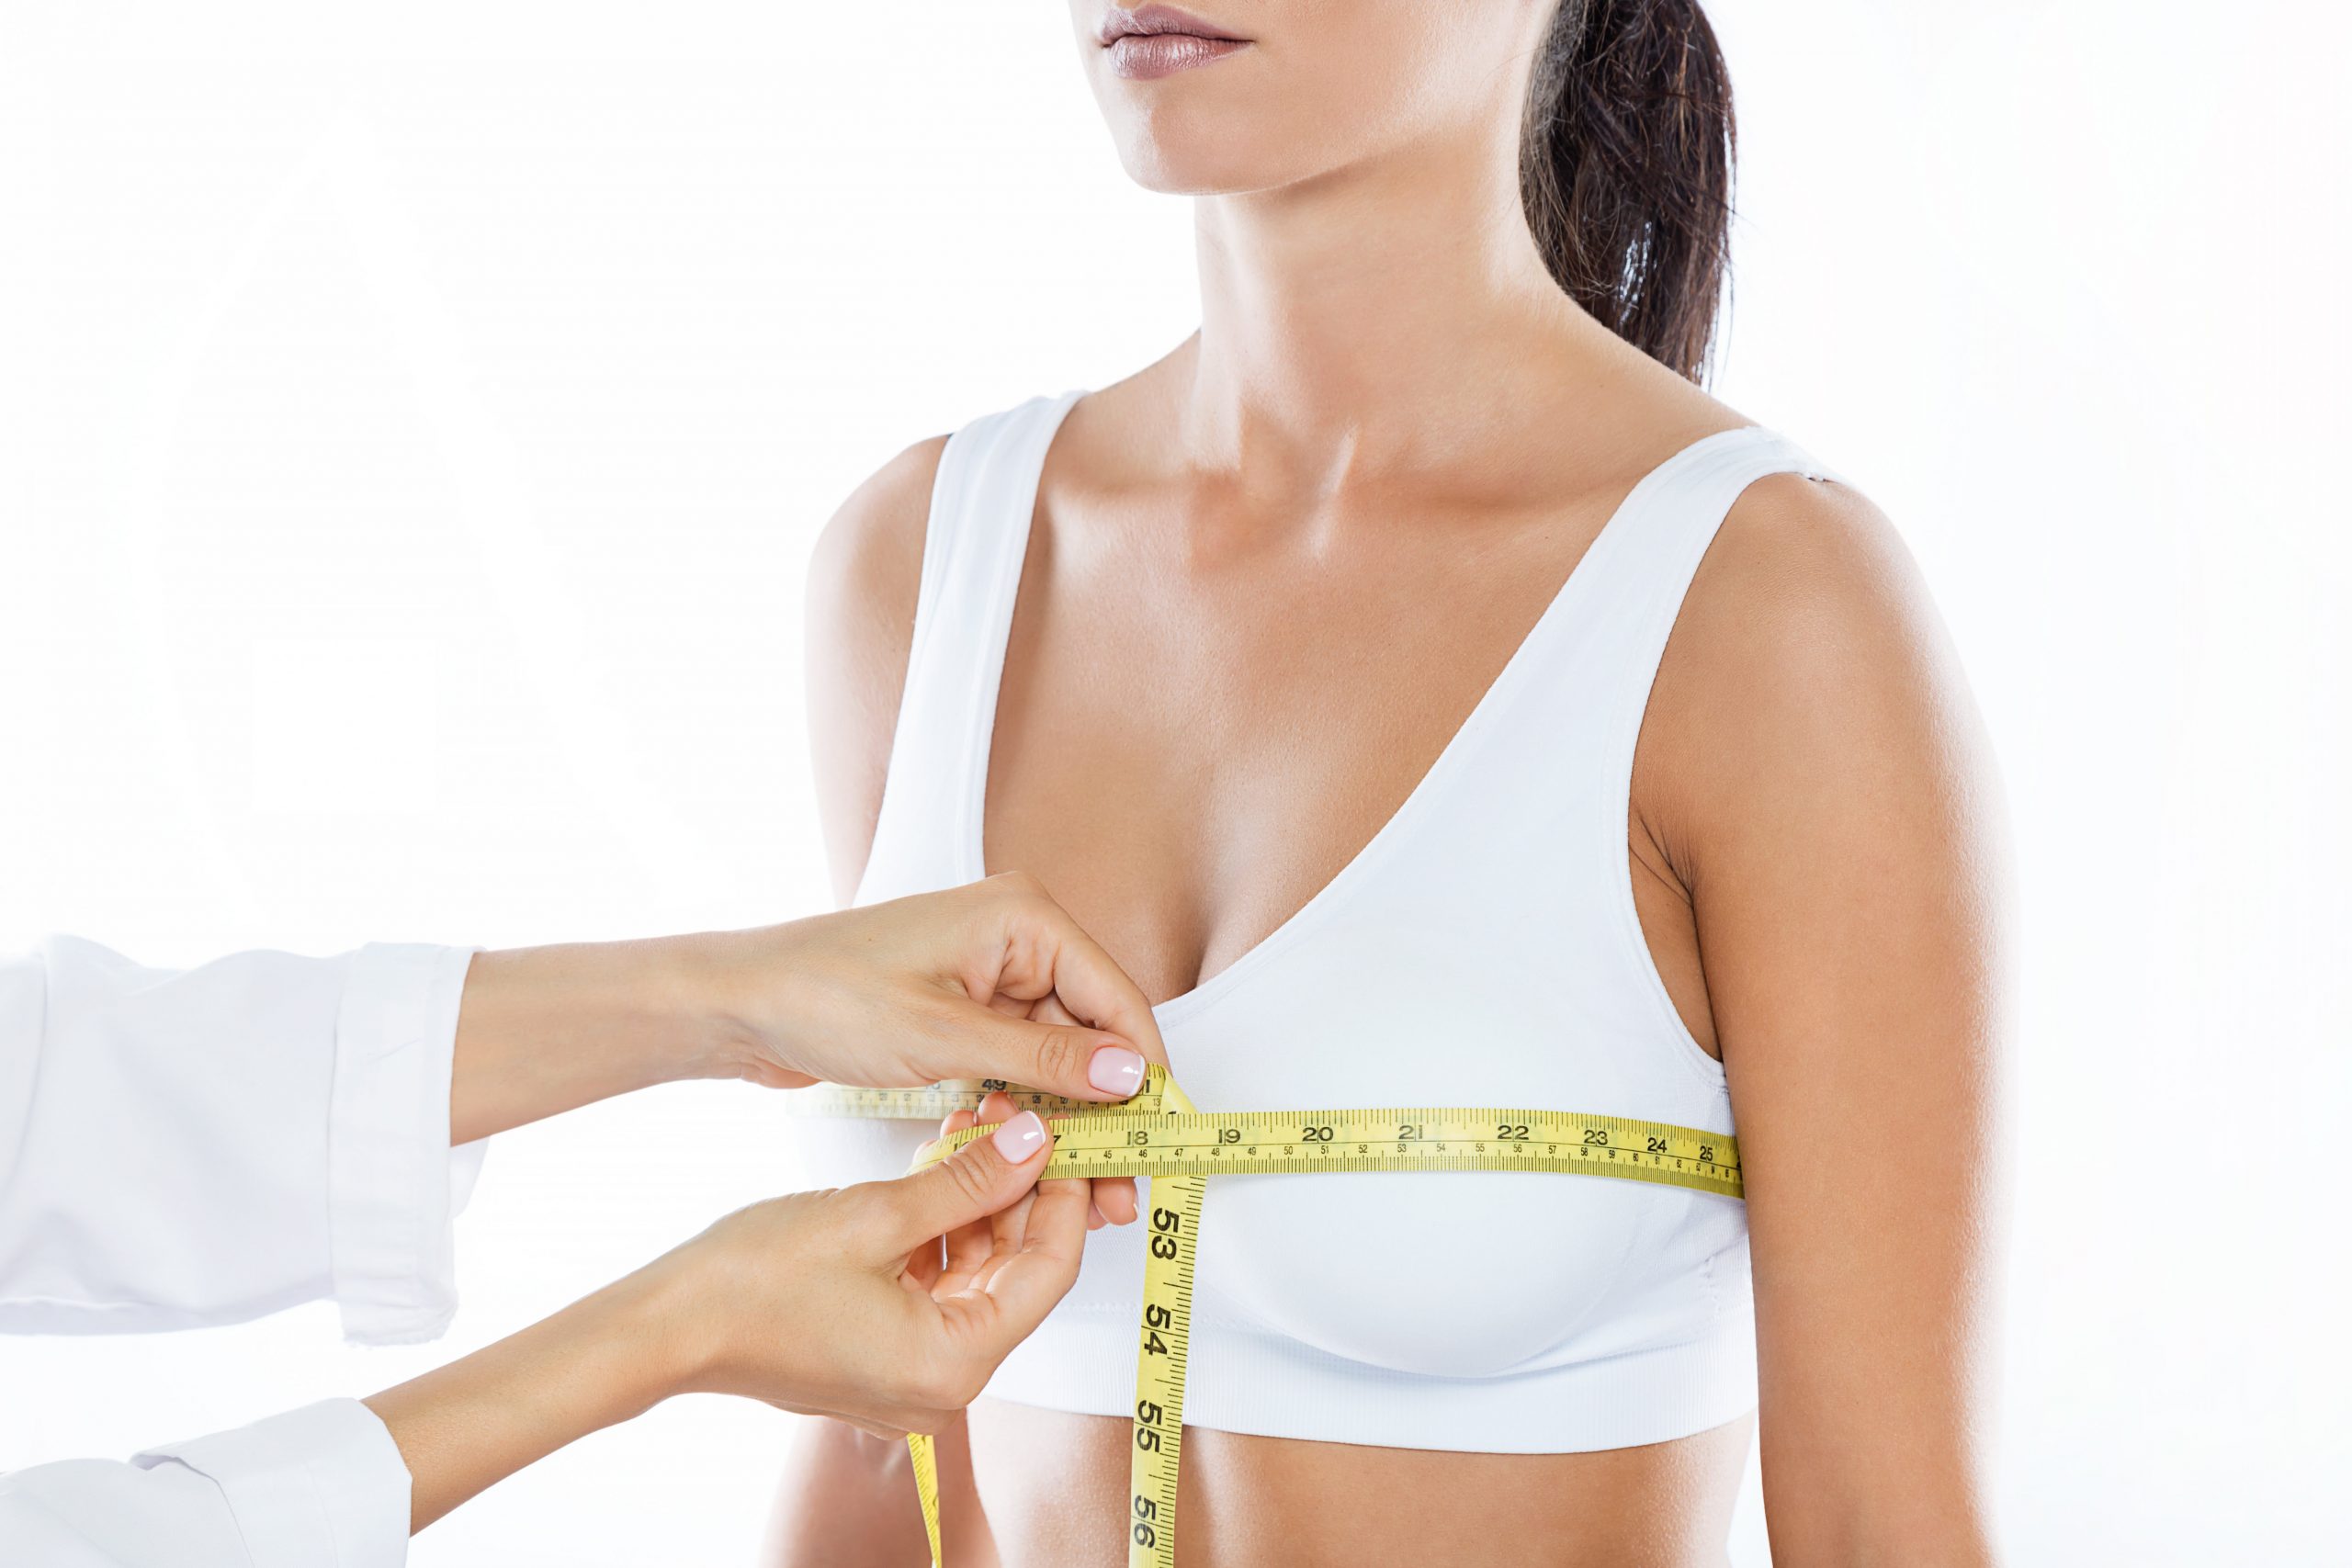 Things you should know before breast augmentation surgery